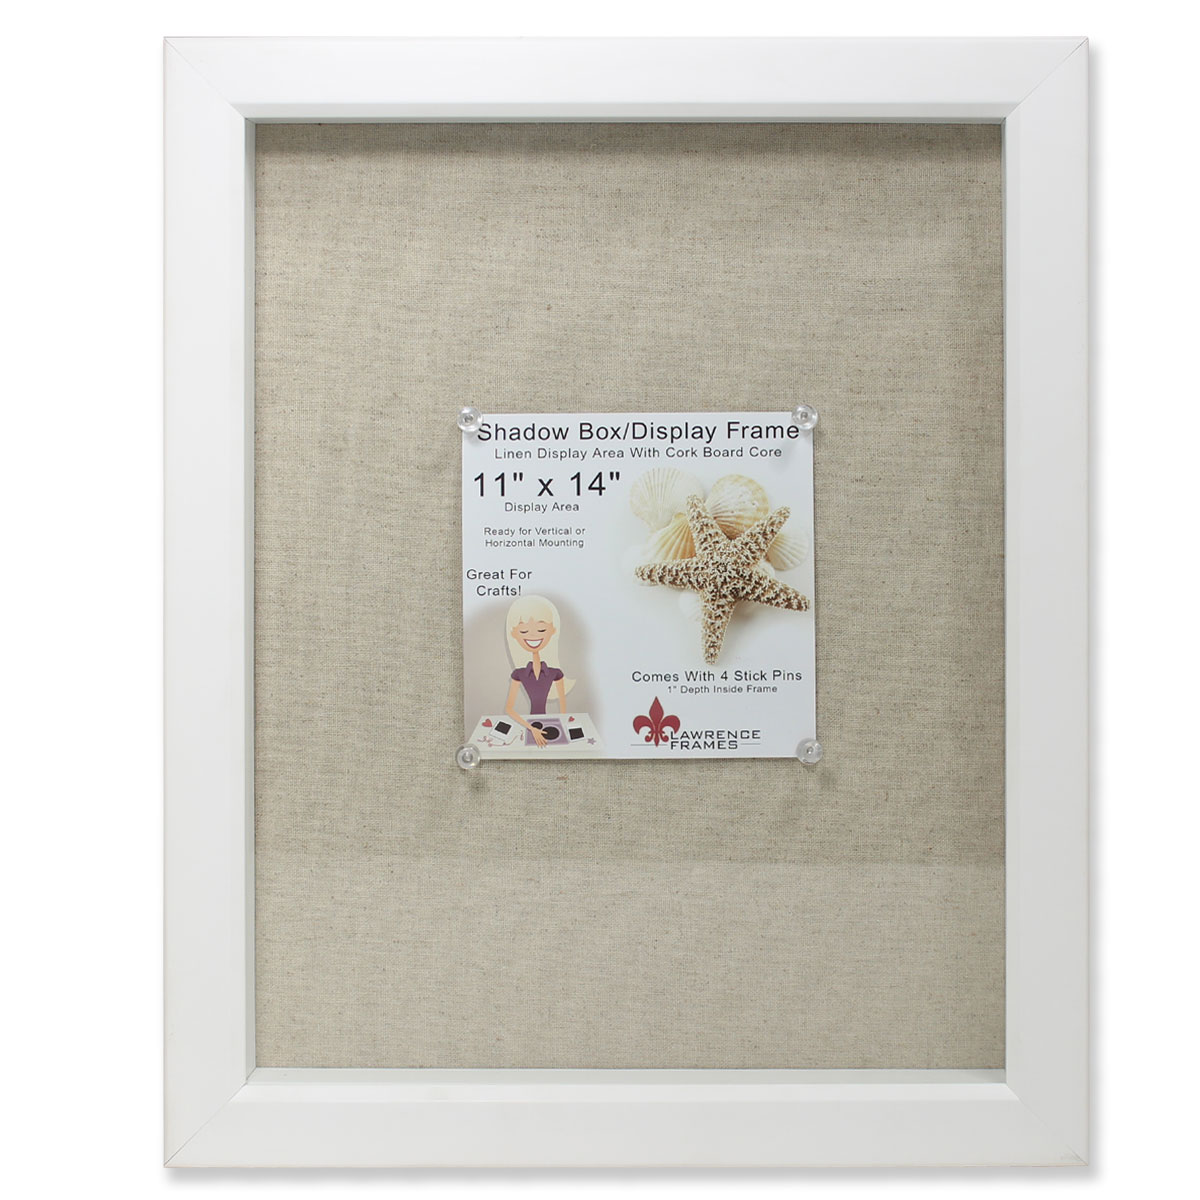 Lawrence Frames White Shadow Box with Linen Display Picture Frame - image 1 of 2